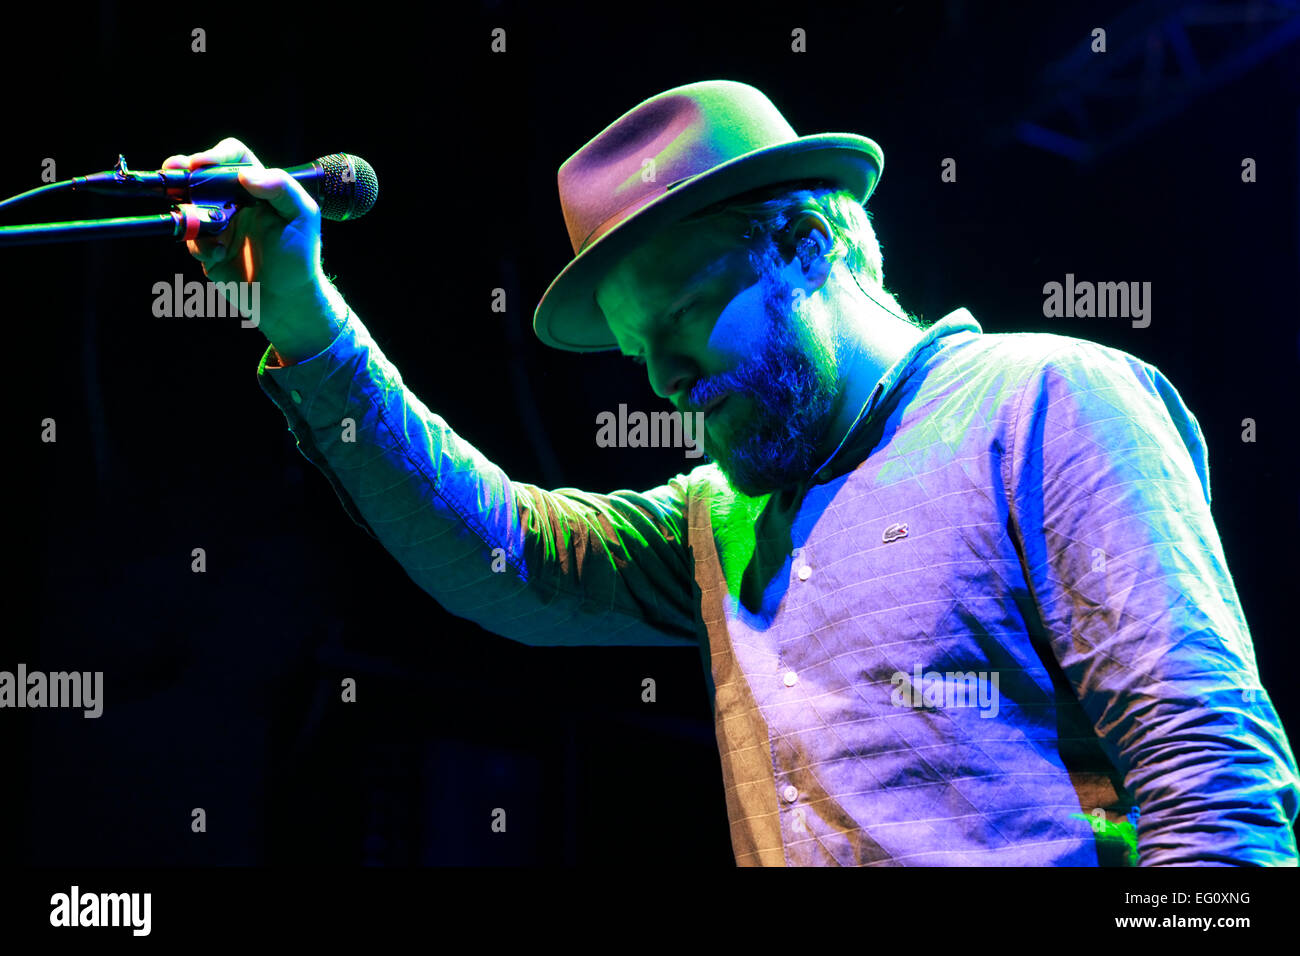 Moscow, Russia - February 2, 2015: British singer, actor and songwriter Alex Clare gave a concert in Moscow Stock Photo